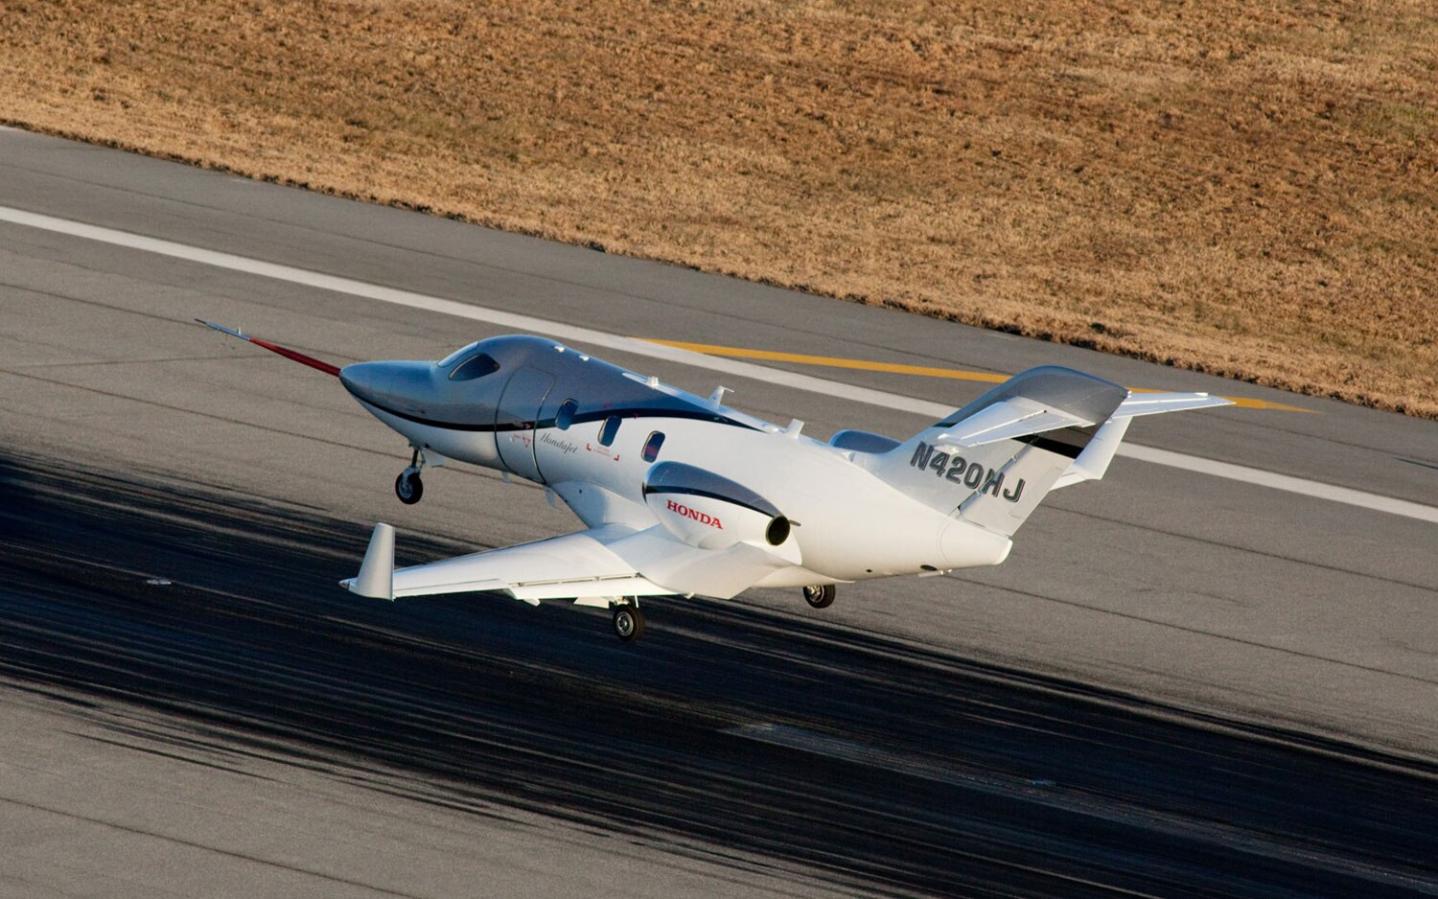 What Are the Future Plans for the HondaJet Program?